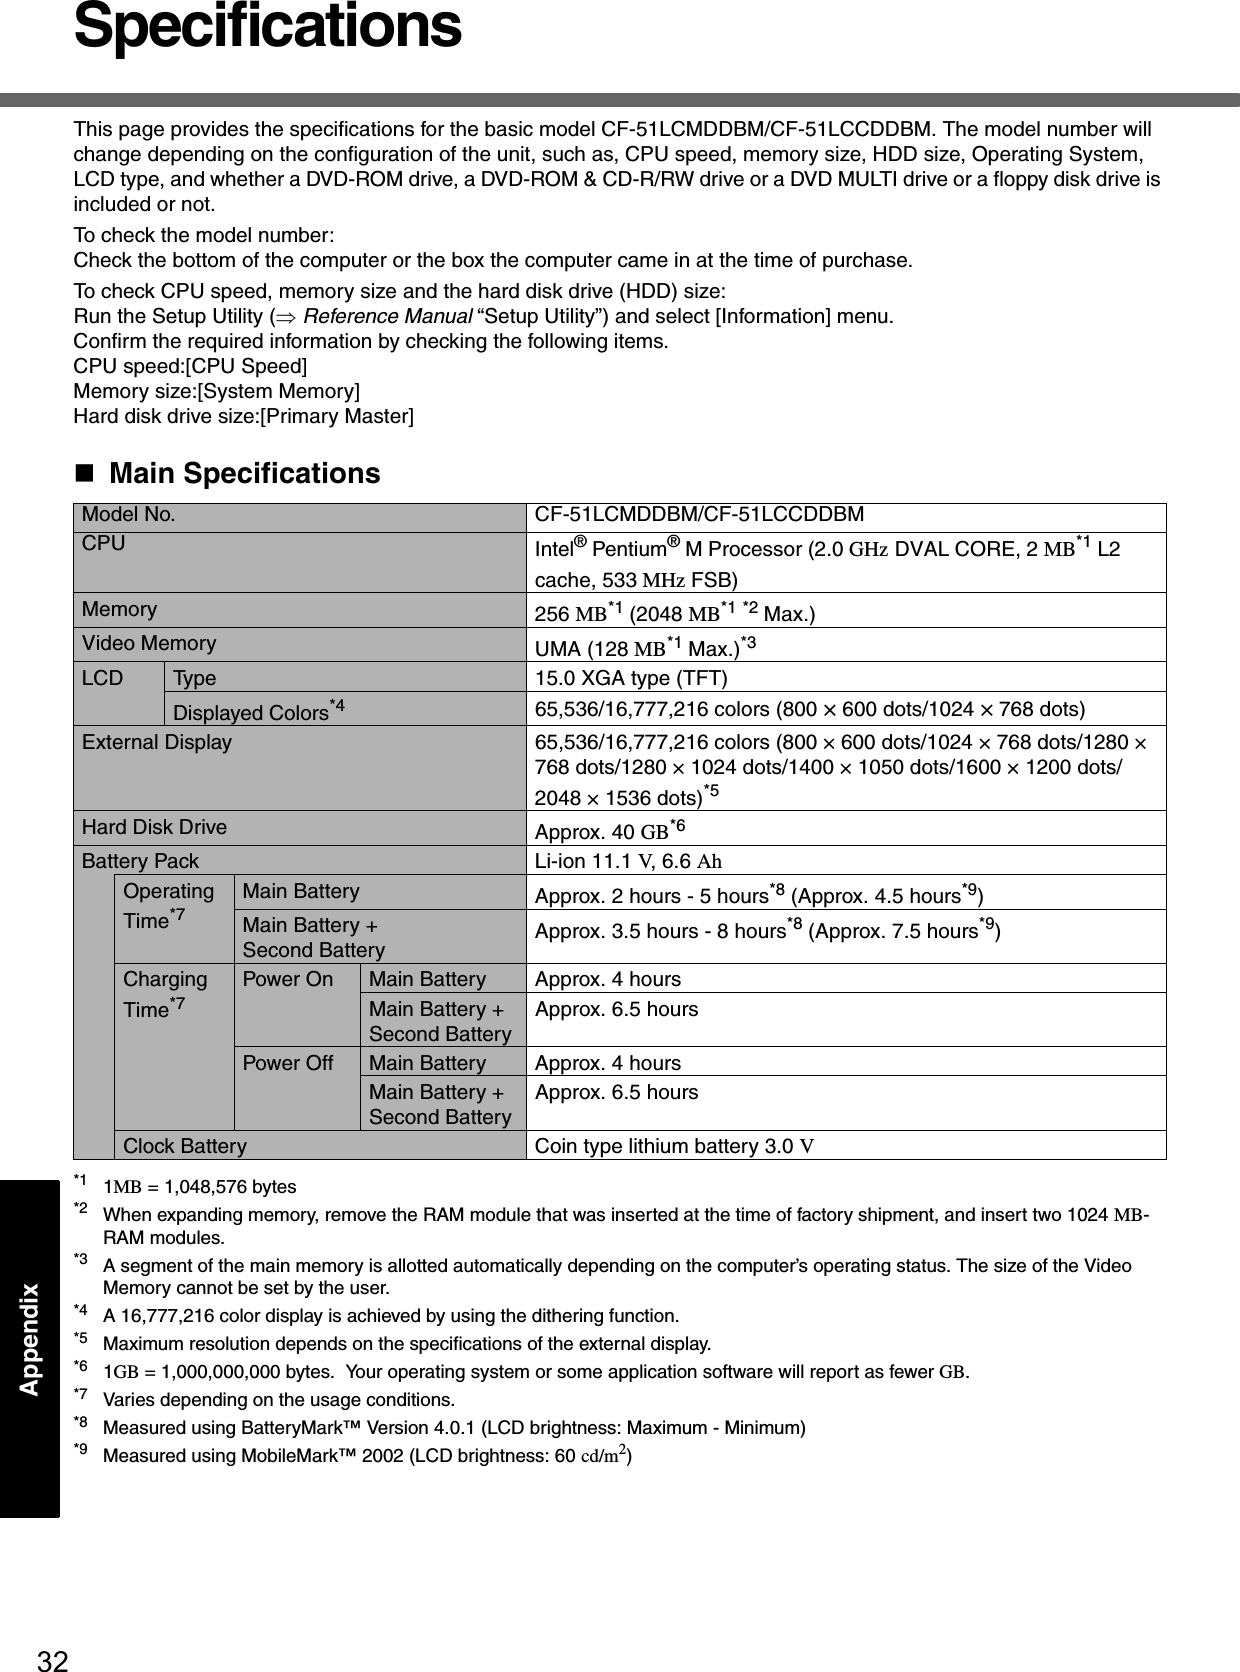 32AppendixSpecificationsThis page provides the specifications for the basic model CF-51LCMDDBM/CF-51LCCDDBM. The model number will change depending on the configuration of the unit, such as, CPU speed, memory size, HDD size, Operating System, LCD type, and whether a DVD-ROM drive, a DVD-ROM &amp; CD-R/RW drive or a DVD MULTI drive or a floppy disk drive is included or not.To check the model number:Check the bottom of the computer or the box the computer came in at the time of purchase.To check CPU speed, memory size and the hard disk drive (HDD) size:Run the Setup Utility (⇒ Reference Manual “Setup Utility”) and select [Information] menu.Confirm the required information by checking the following items.CPU speed:[CPU Speed]Memory size:[System Memory]Hard disk drive size:[Primary Master]Main Specifications*1 1MB = 1,048,576 bytes*2 When expanding memory, remove the RAM module that was inserted at the time of factory shipment, and insert two 1024 MB-RAM modules.*3 A segment of the main memory is allotted automatically depending on the computer’s operating status. The size of the Video Memory cannot be set by the user.*4 A 16,777,216 color display is achieved by using the dithering function.*5 Maximum resolution depends on the specifications of the external display.*6 1GB = 1,000,000,000 bytes.  Your operating system or some application software will report as fewer GB.*7 Varies depending on the usage conditions.*8 Measured using BatteryMark™ Version 4.0.1 (LCD brightness: Maximum - Minimum)*9 Measured using MobileMark™ 2002 (LCD brightness: 60 cd/m2)Model No. CF-51LCMDDBM/CF-51LCCDDBMCPU Intel® Pentium® M Processor (2.0 GHz   DVAL CORE, 2 MB*1 L2cache, 533 MHz FSB)Memory 256 MB*1 (2048 MB*1 *2 Max.)Video Memory UMA (128 MB*1 Max.)*3LCD Type 15.0 XGA type (TFT)Displayed Colors*4 65,536/16,777,216 colors (800 × 600 dots/1024 × 768 dots)External Display 65,536/16,777,216 colors (800 × 600 dots/1024 × 768 dots/1280 × 768 dots/1280 × 1024 dots/1400 × 1050 dots/1600 × 1200 dots/2048 × 1536 dots)*5Hard Disk Drive Approx. 40 GB*6Battery Pack Li-ion 11.1 V, 6.6 AhOperating Time*7Main Battery  Approx. 2 hours - 5 hours*8 (Approx. 4.5 hours*9)Main Battery + Second Battery Approx. 3.5 hours - 8 hours*8 (Approx. 7.5 hours*9)Charging Time*7Power On Main Battery  Approx. 4 hoursMain Battery + Second BatteryApprox. 6.5 hoursPower Off Main Battery  Approx. 4 hoursMain Battery + Second BatteryApprox. 6.5 hoursClock Battery Coin type lithium battery 3.0 V